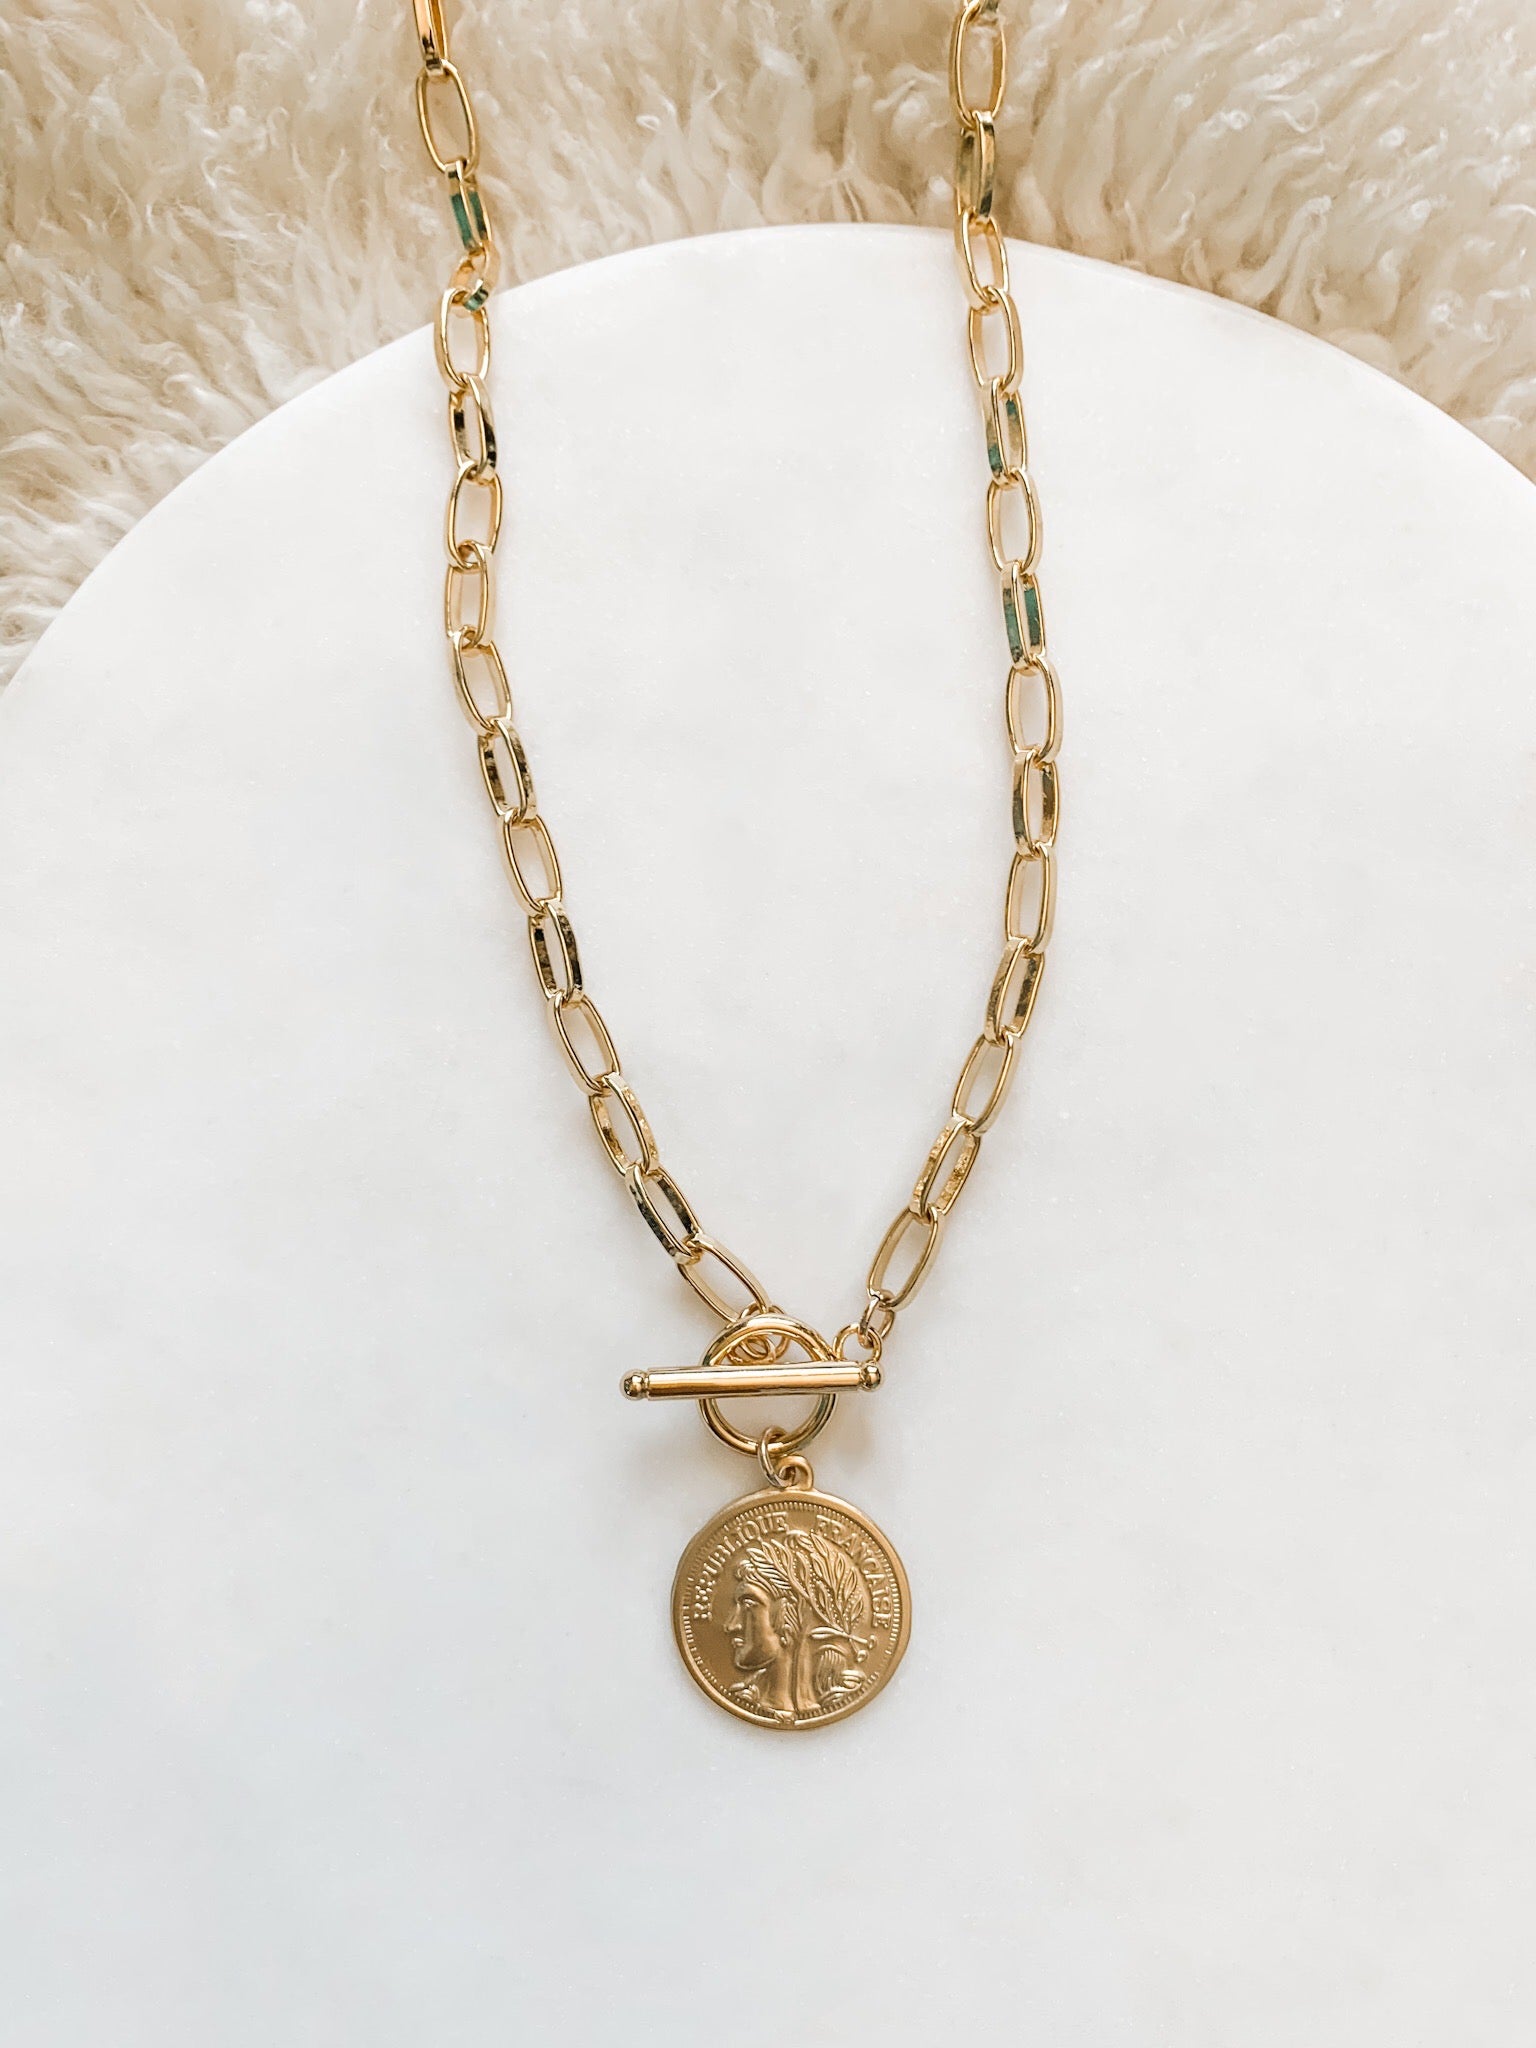 Gold Reproduction French Coin Necklace-porcelain Glass Coin 